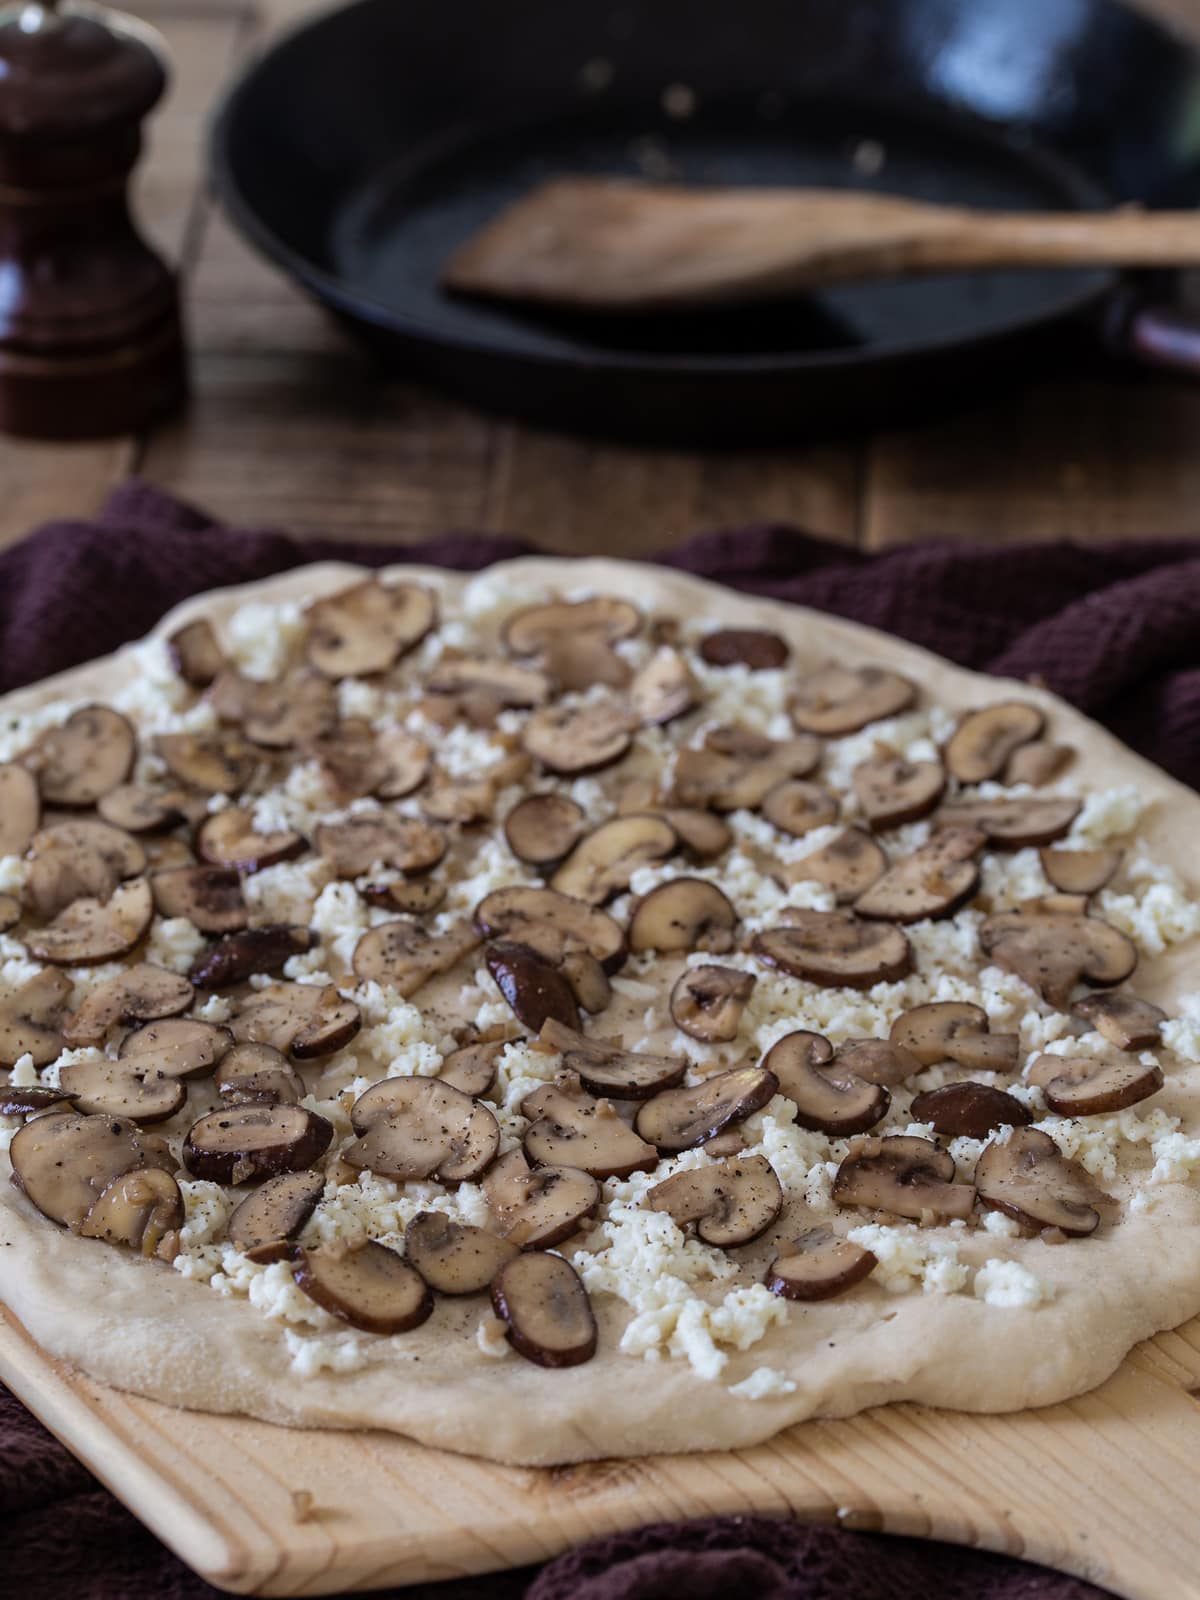 Pizza dough topped with mozzarella and sautéed mushrooms.